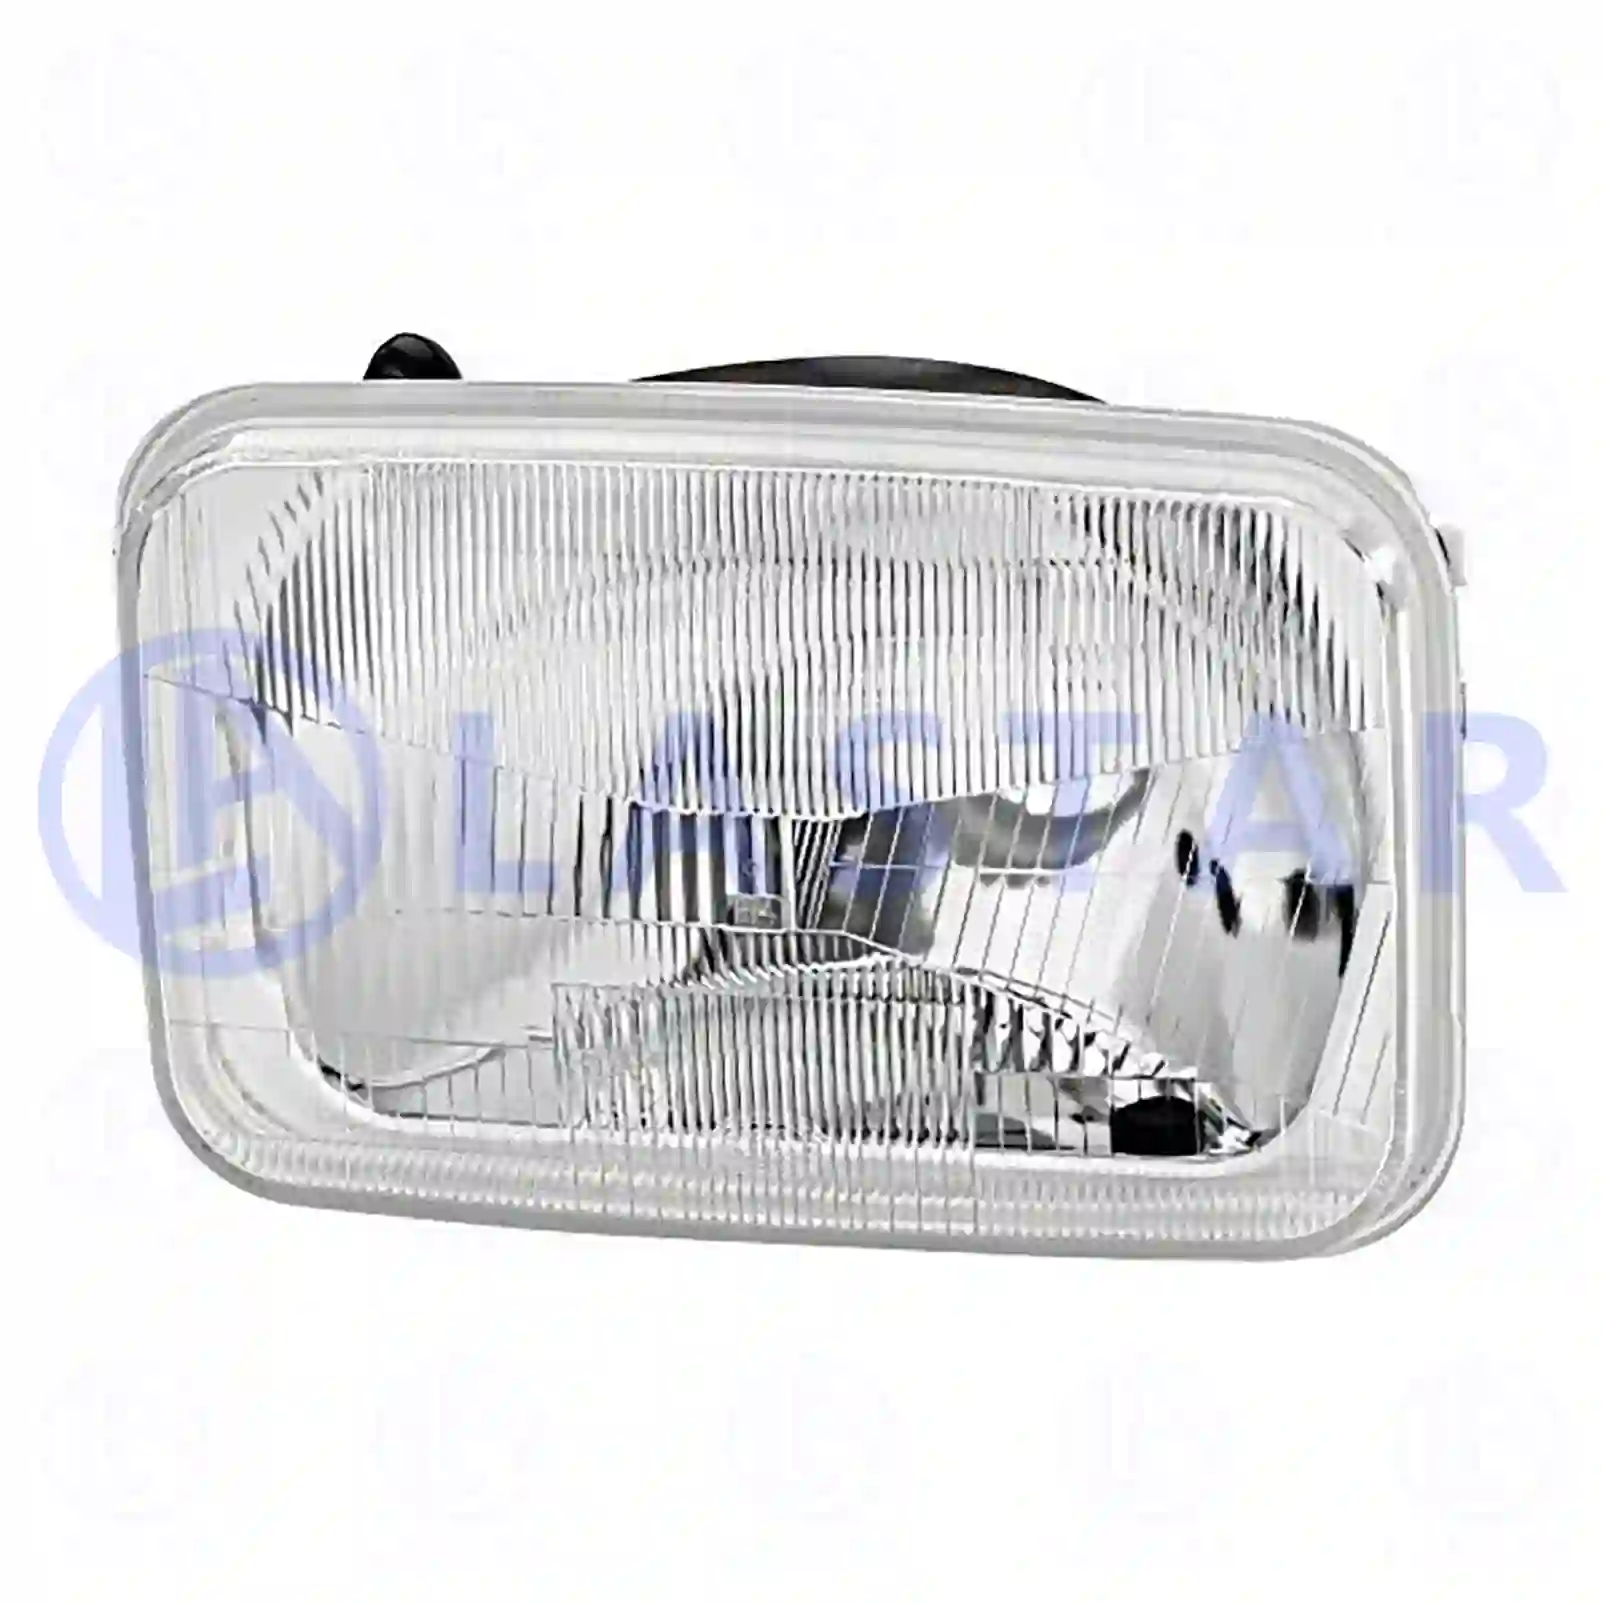 Headlamp, without bulb, 77710967, 1525773, 3981594, 8144286, ZG20519-0008, ||  77710967 Lastar Spare Part | Truck Spare Parts, Auotomotive Spare Parts Headlamp, without bulb, 77710967, 1525773, 3981594, 8144286, ZG20519-0008, ||  77710967 Lastar Spare Part | Truck Spare Parts, Auotomotive Spare Parts